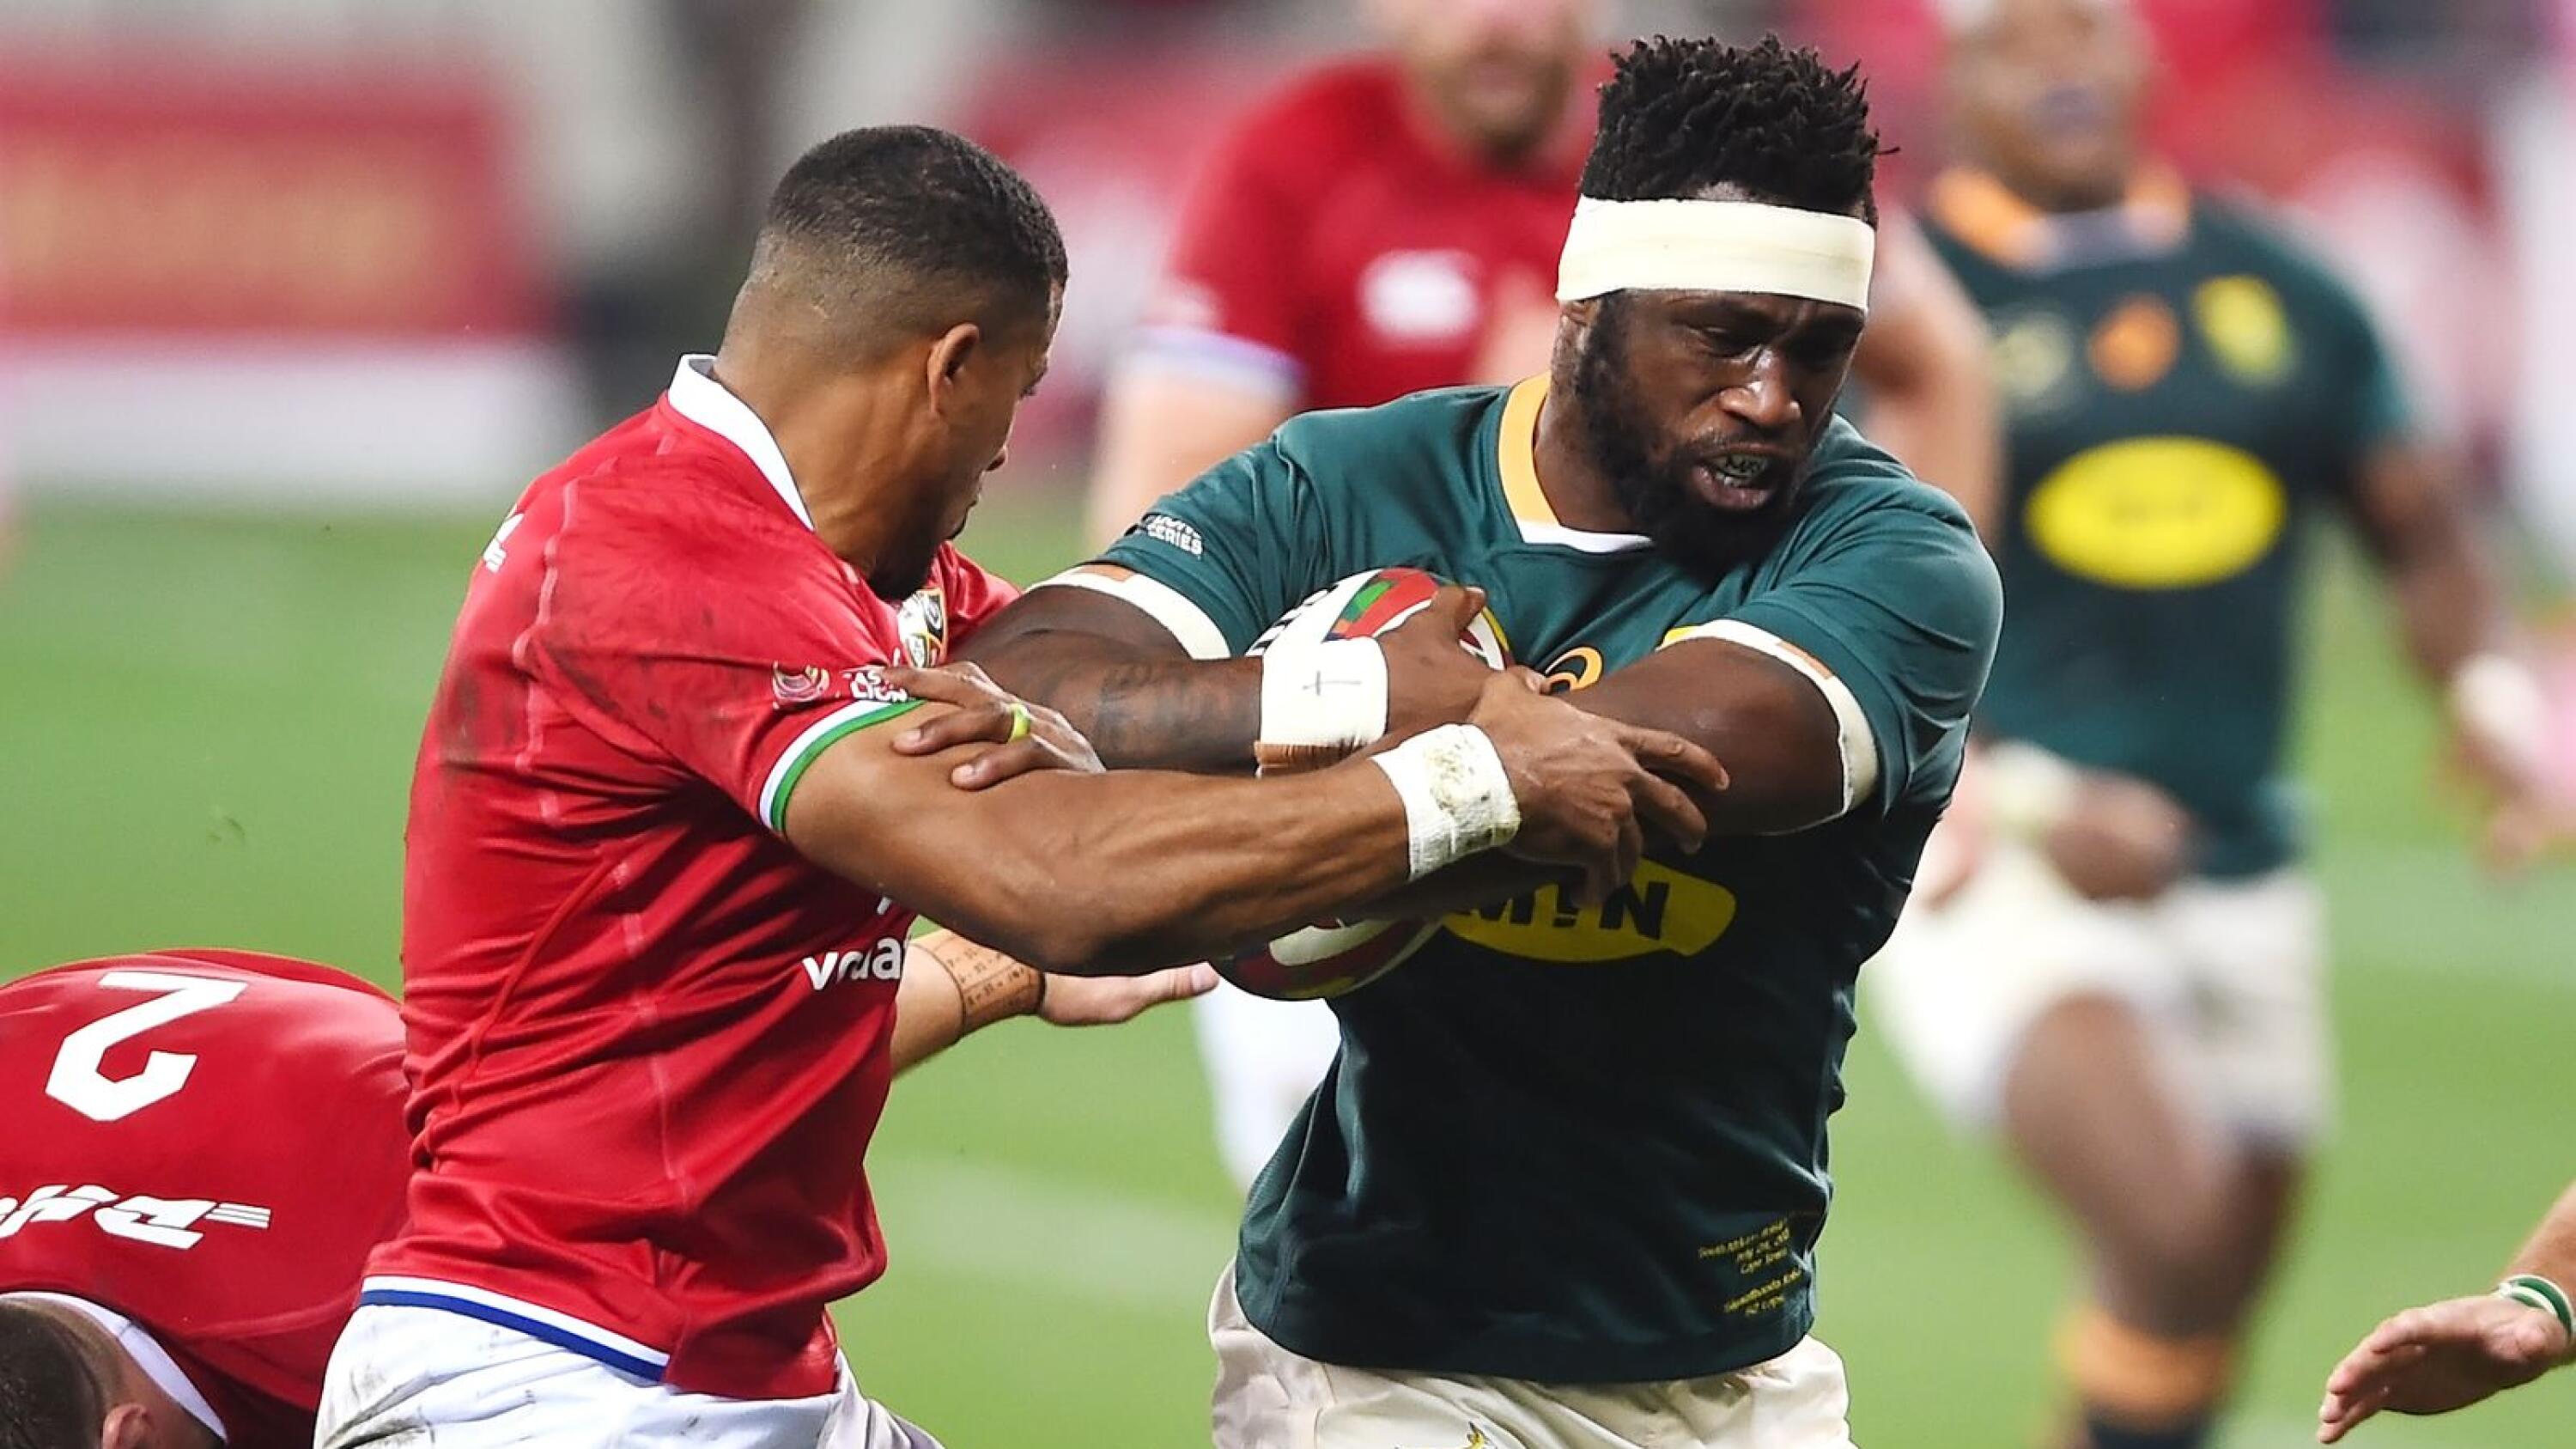 Springboks captain Siya Kolisi is tackled by Anthony Watson of the British & Irish Lions during their first Test at the Cape Town Stadium on Saturday